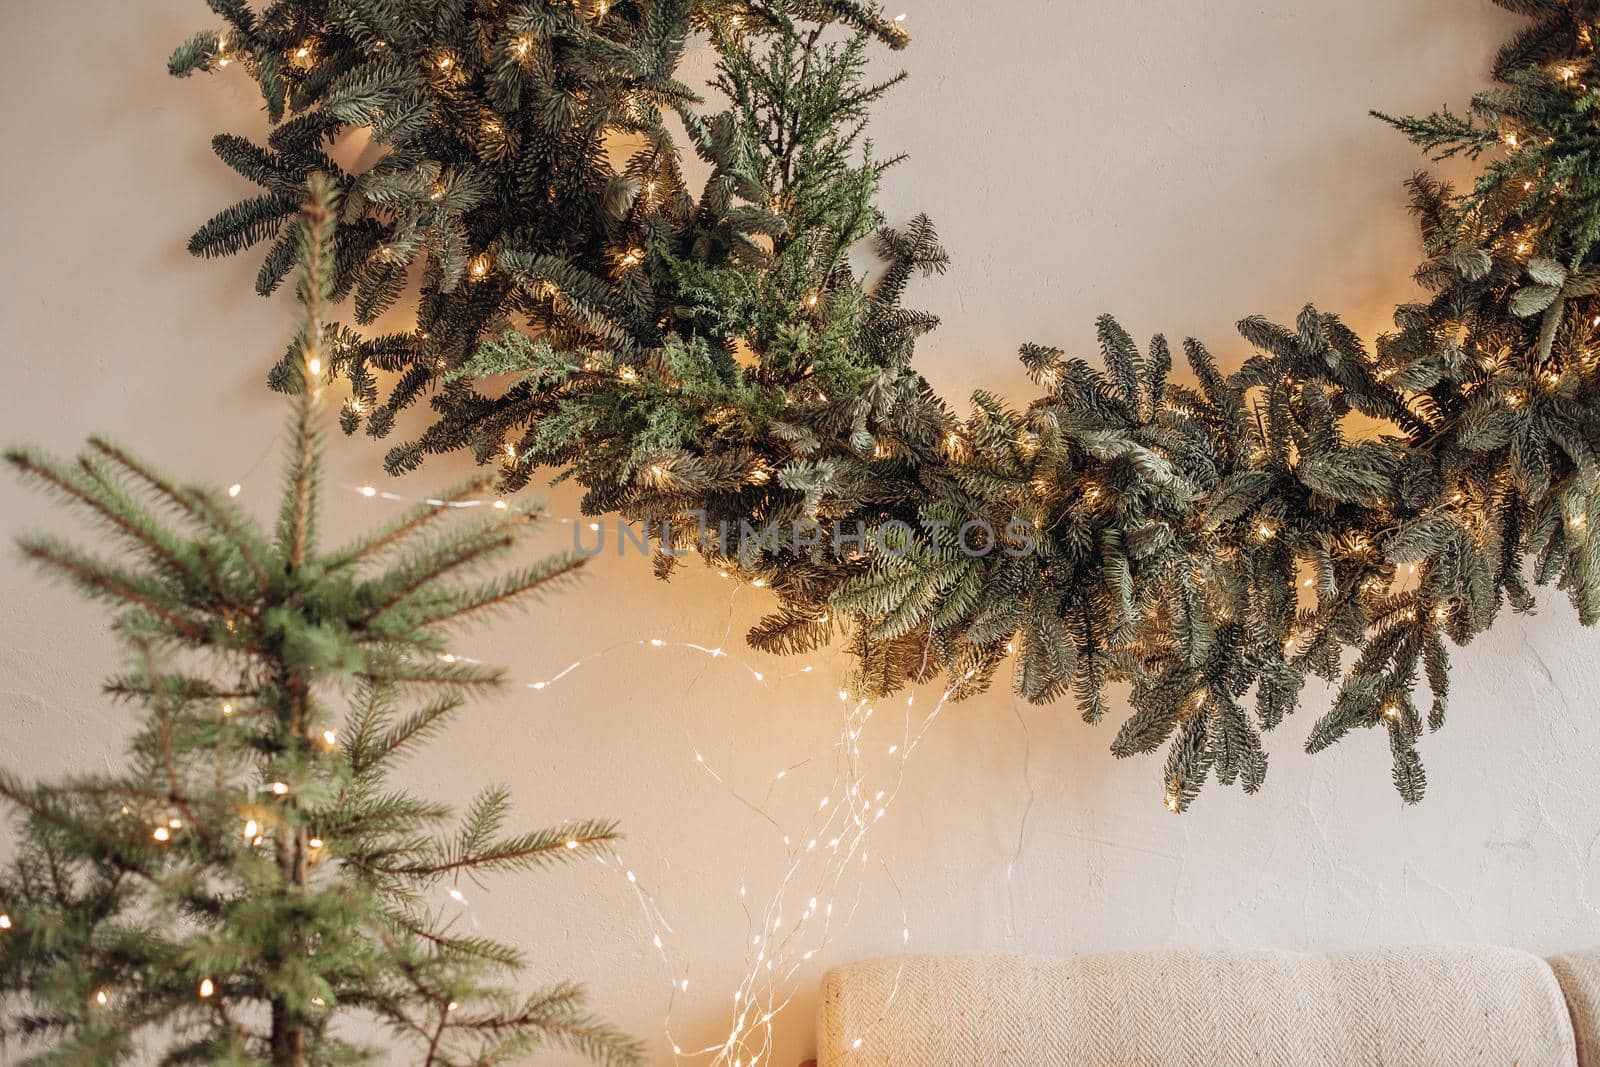 View over decorated artificial fireplace with decorations inside. Handmade paper stars, candles inside. Beautiful coniferous wreath on the top of fireplace. Decorative round mirror over the fireplace.